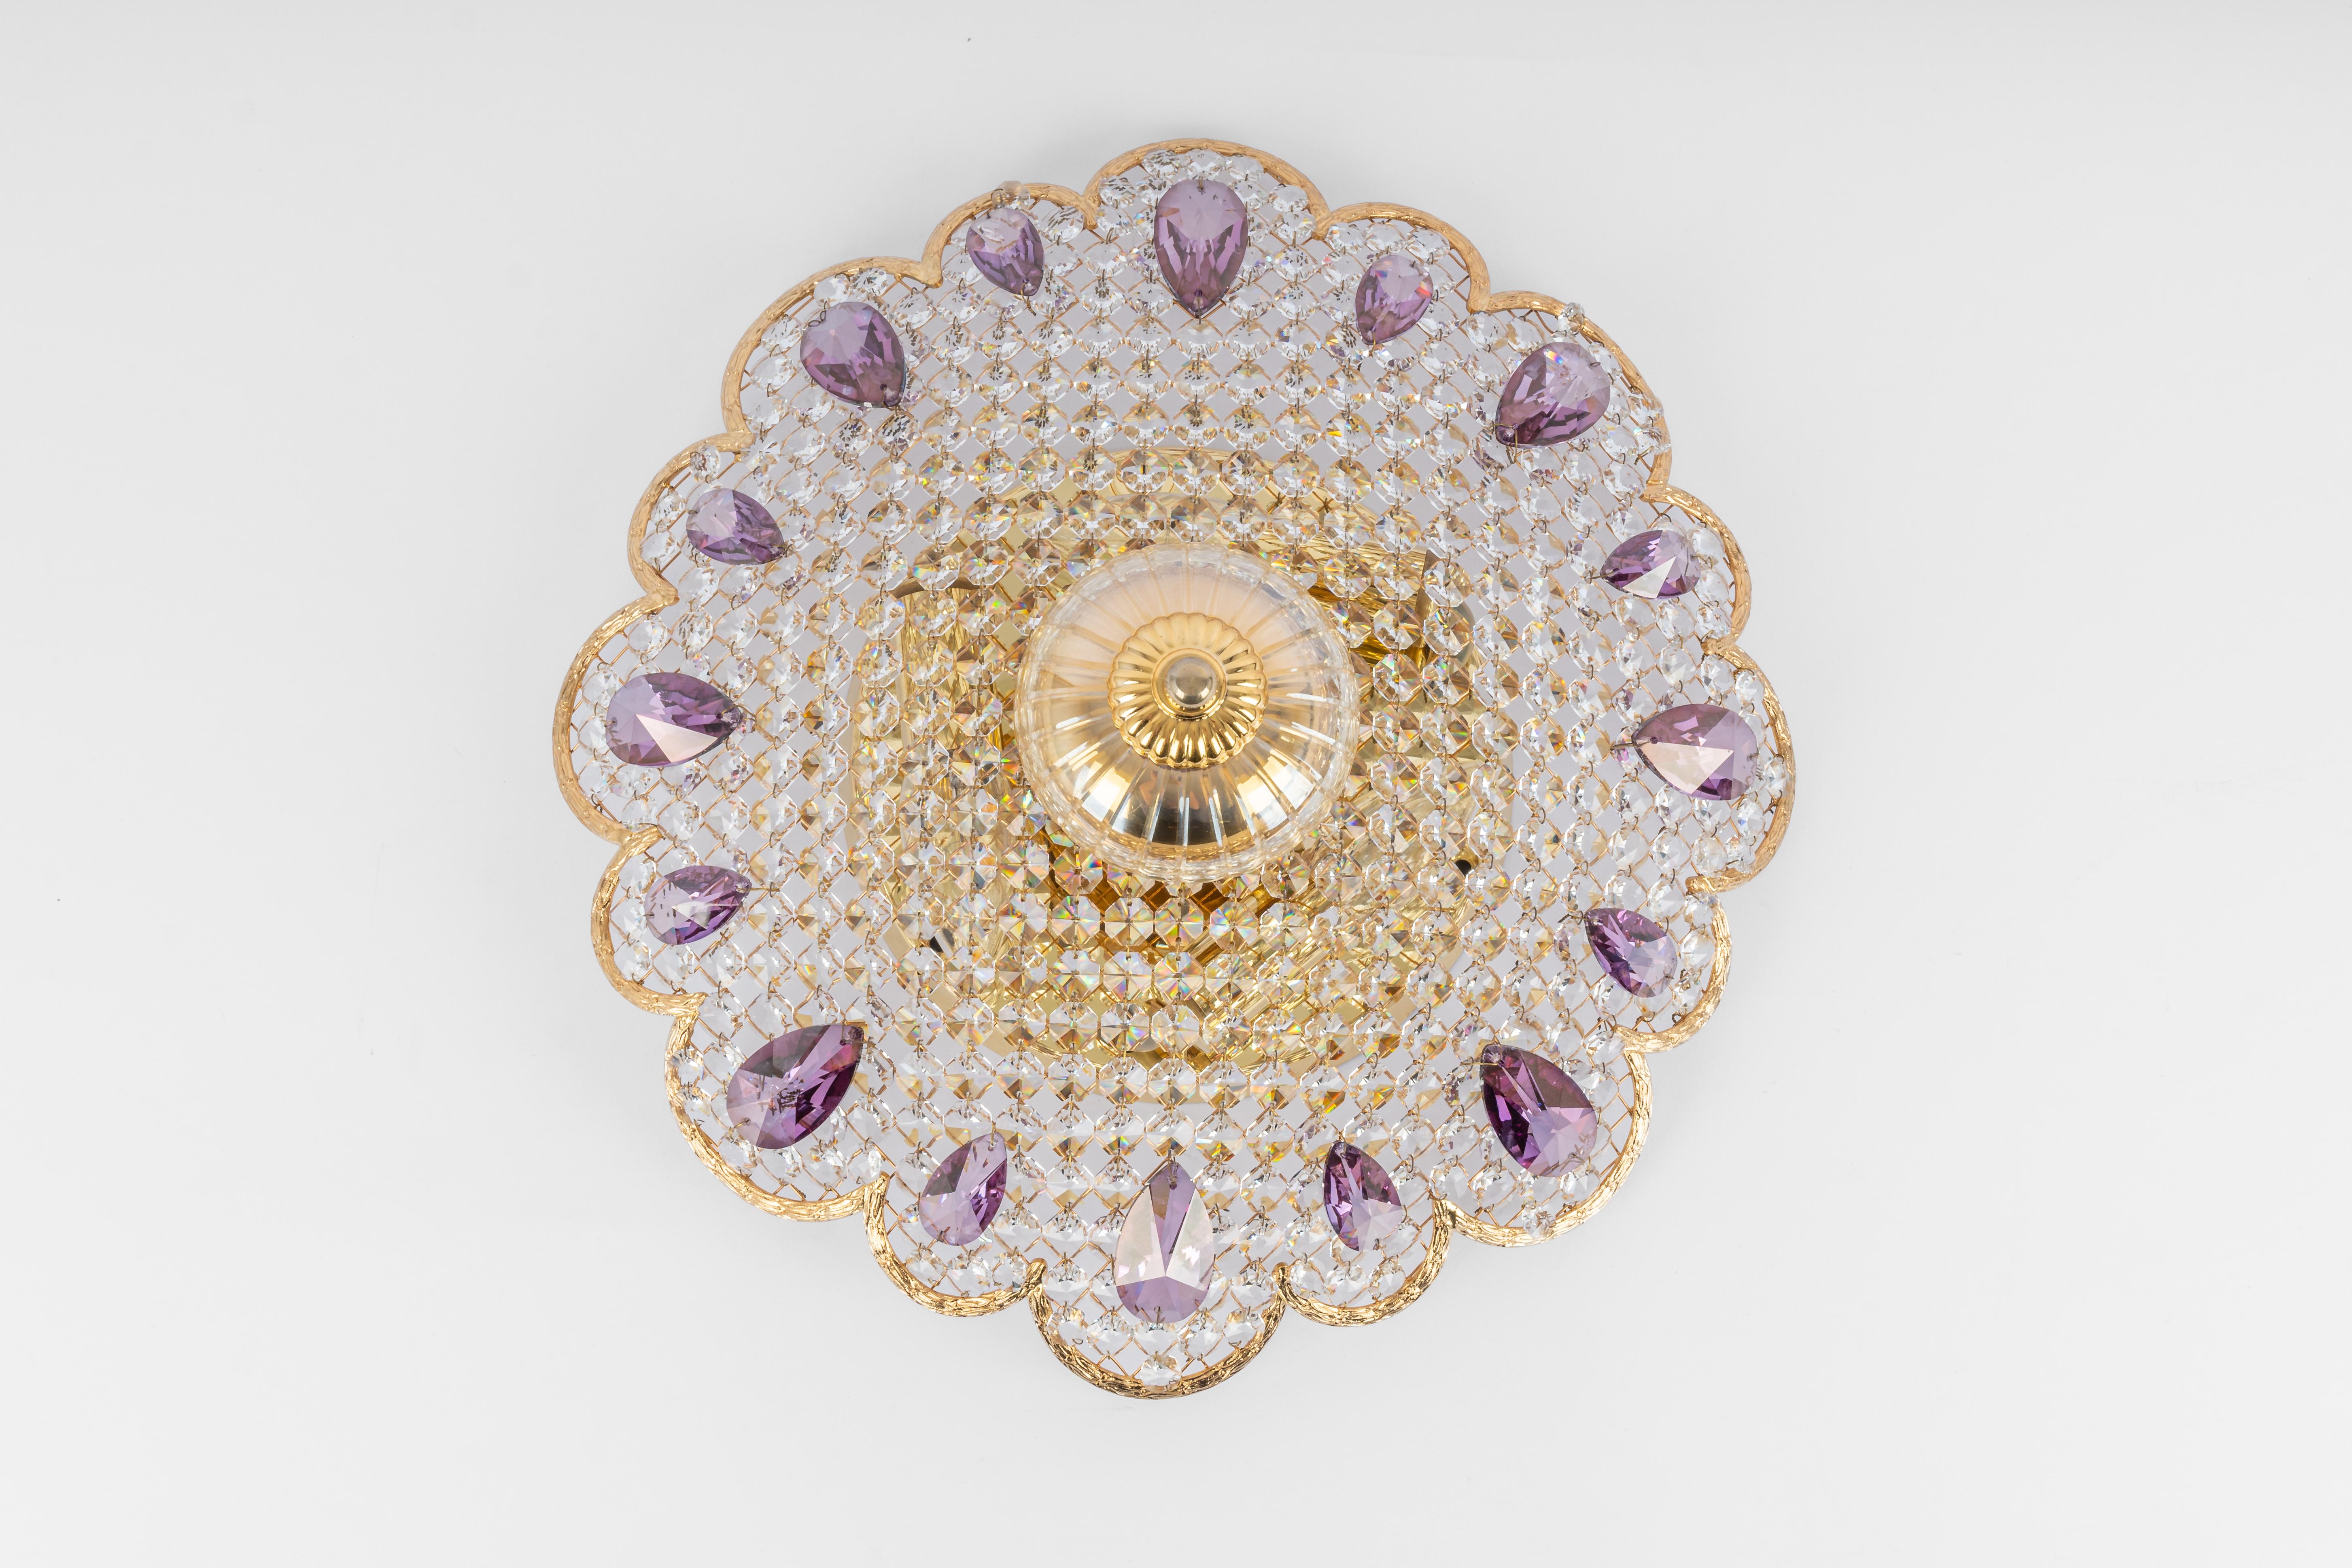 Petite Delicate floral Flush mount with crystal glass and gilded brass parts made by Palwa, Germany, 1970s.
Measures: Diameter 14.1